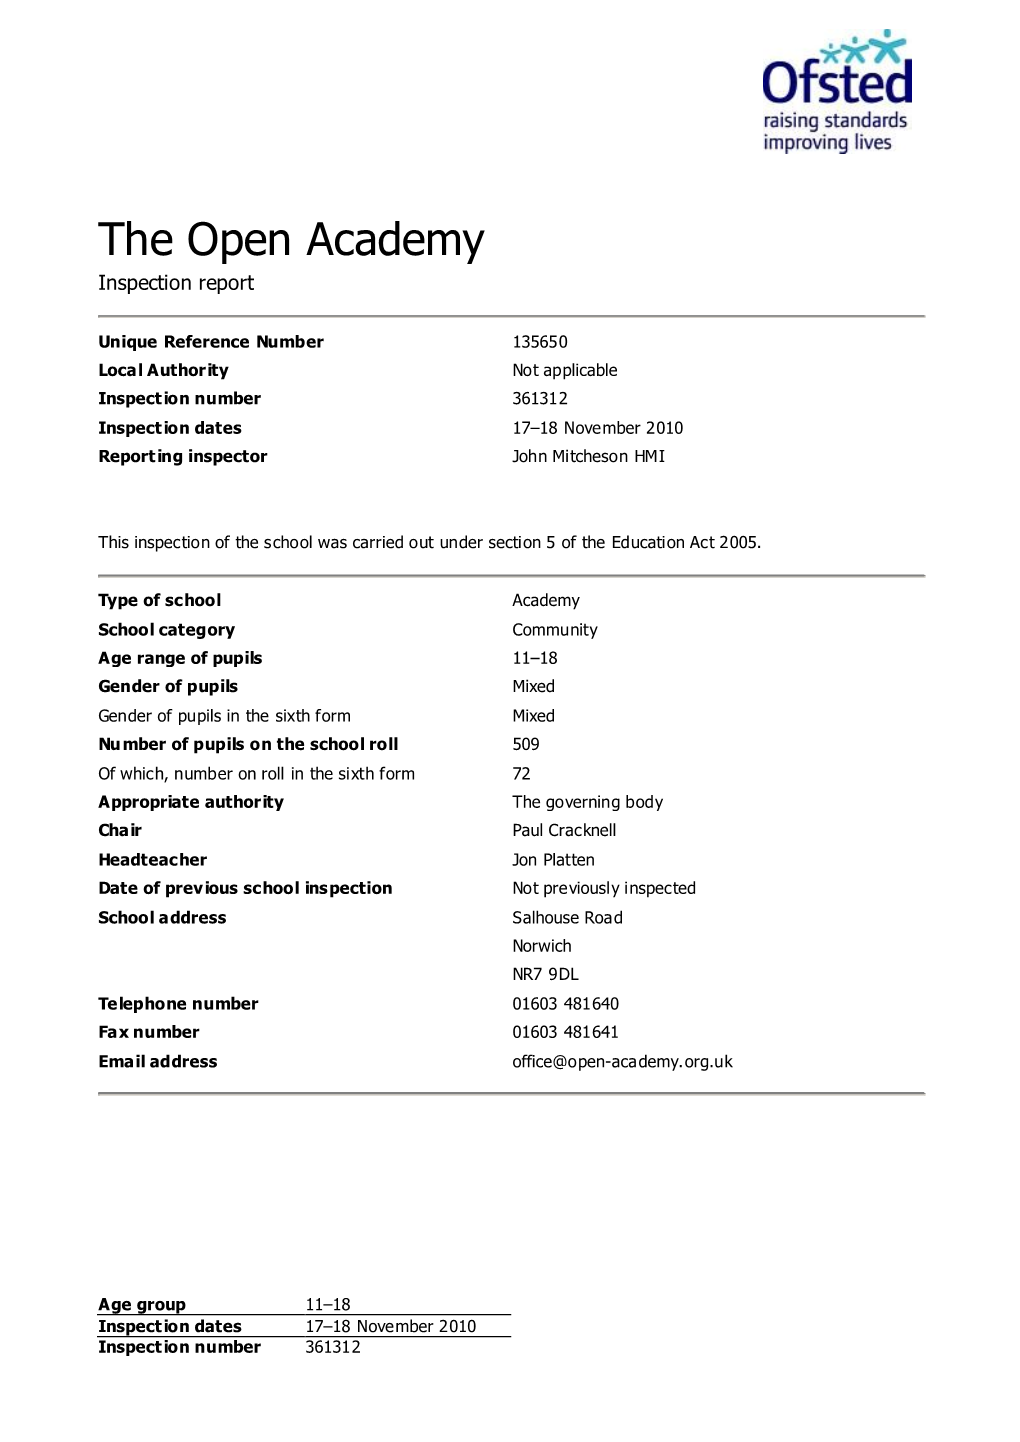 The Open Academy Inspection Report